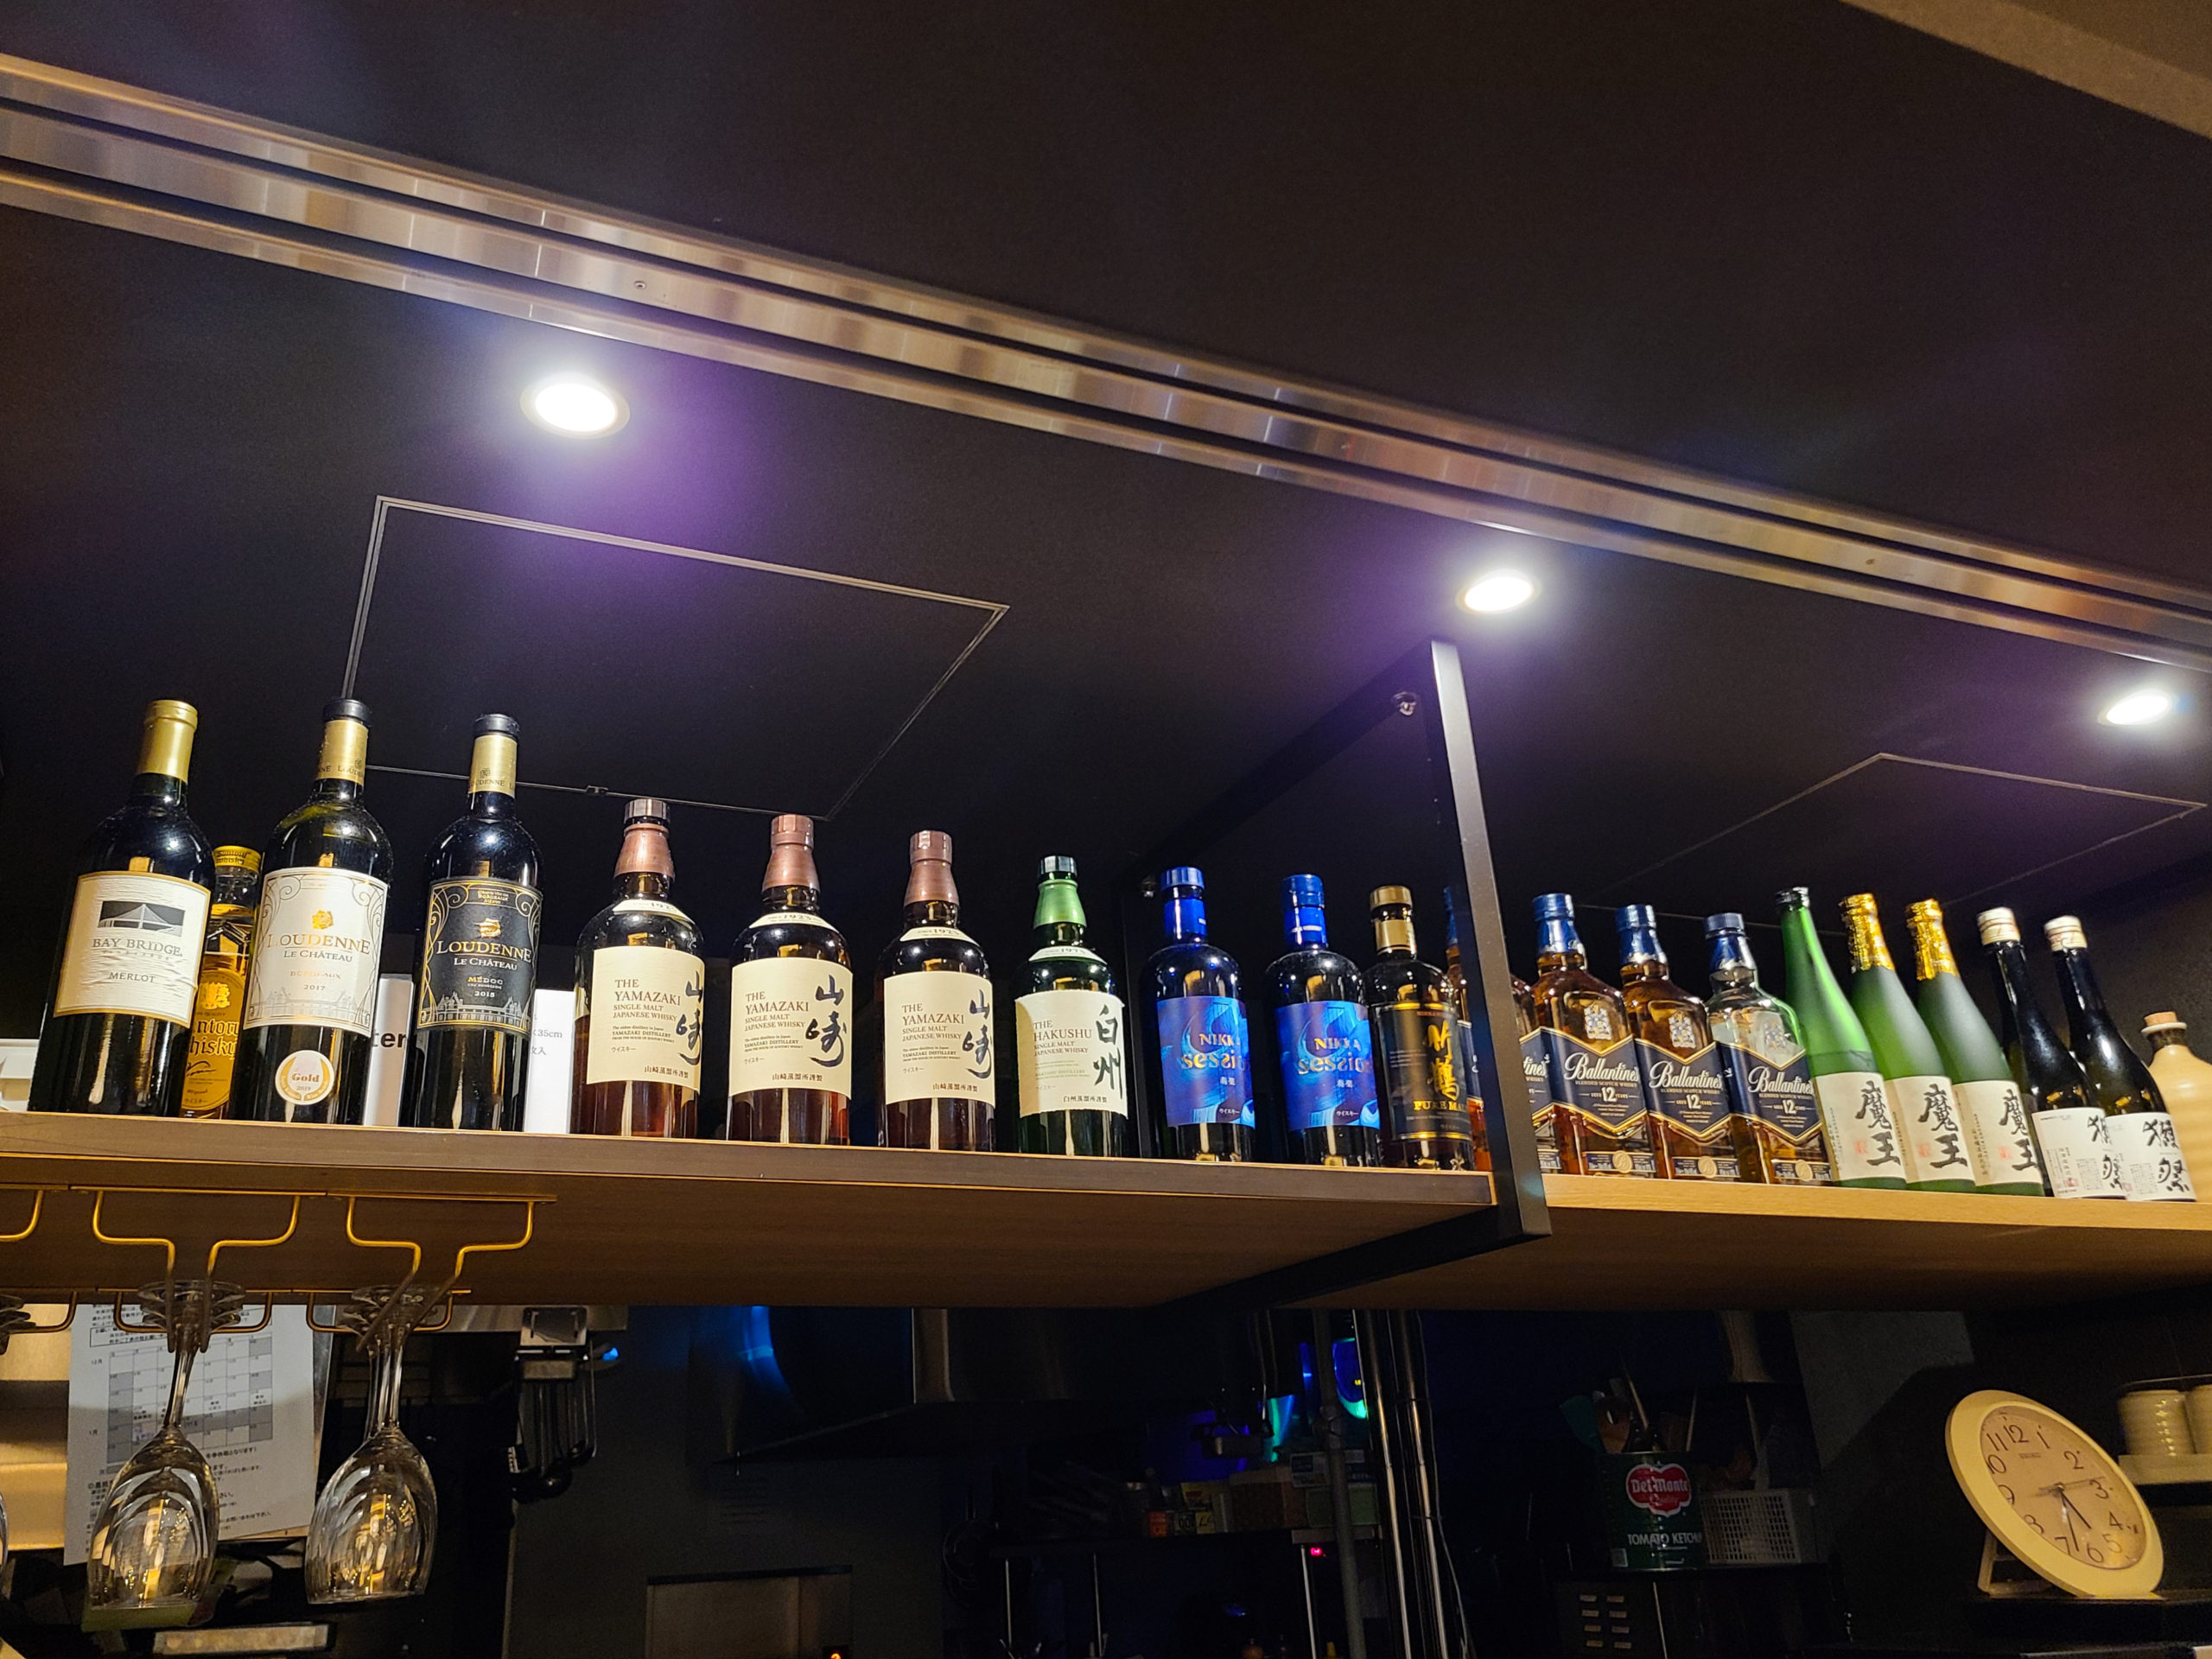 The bar counter at the restaurant, its shelf lined with various whiskies